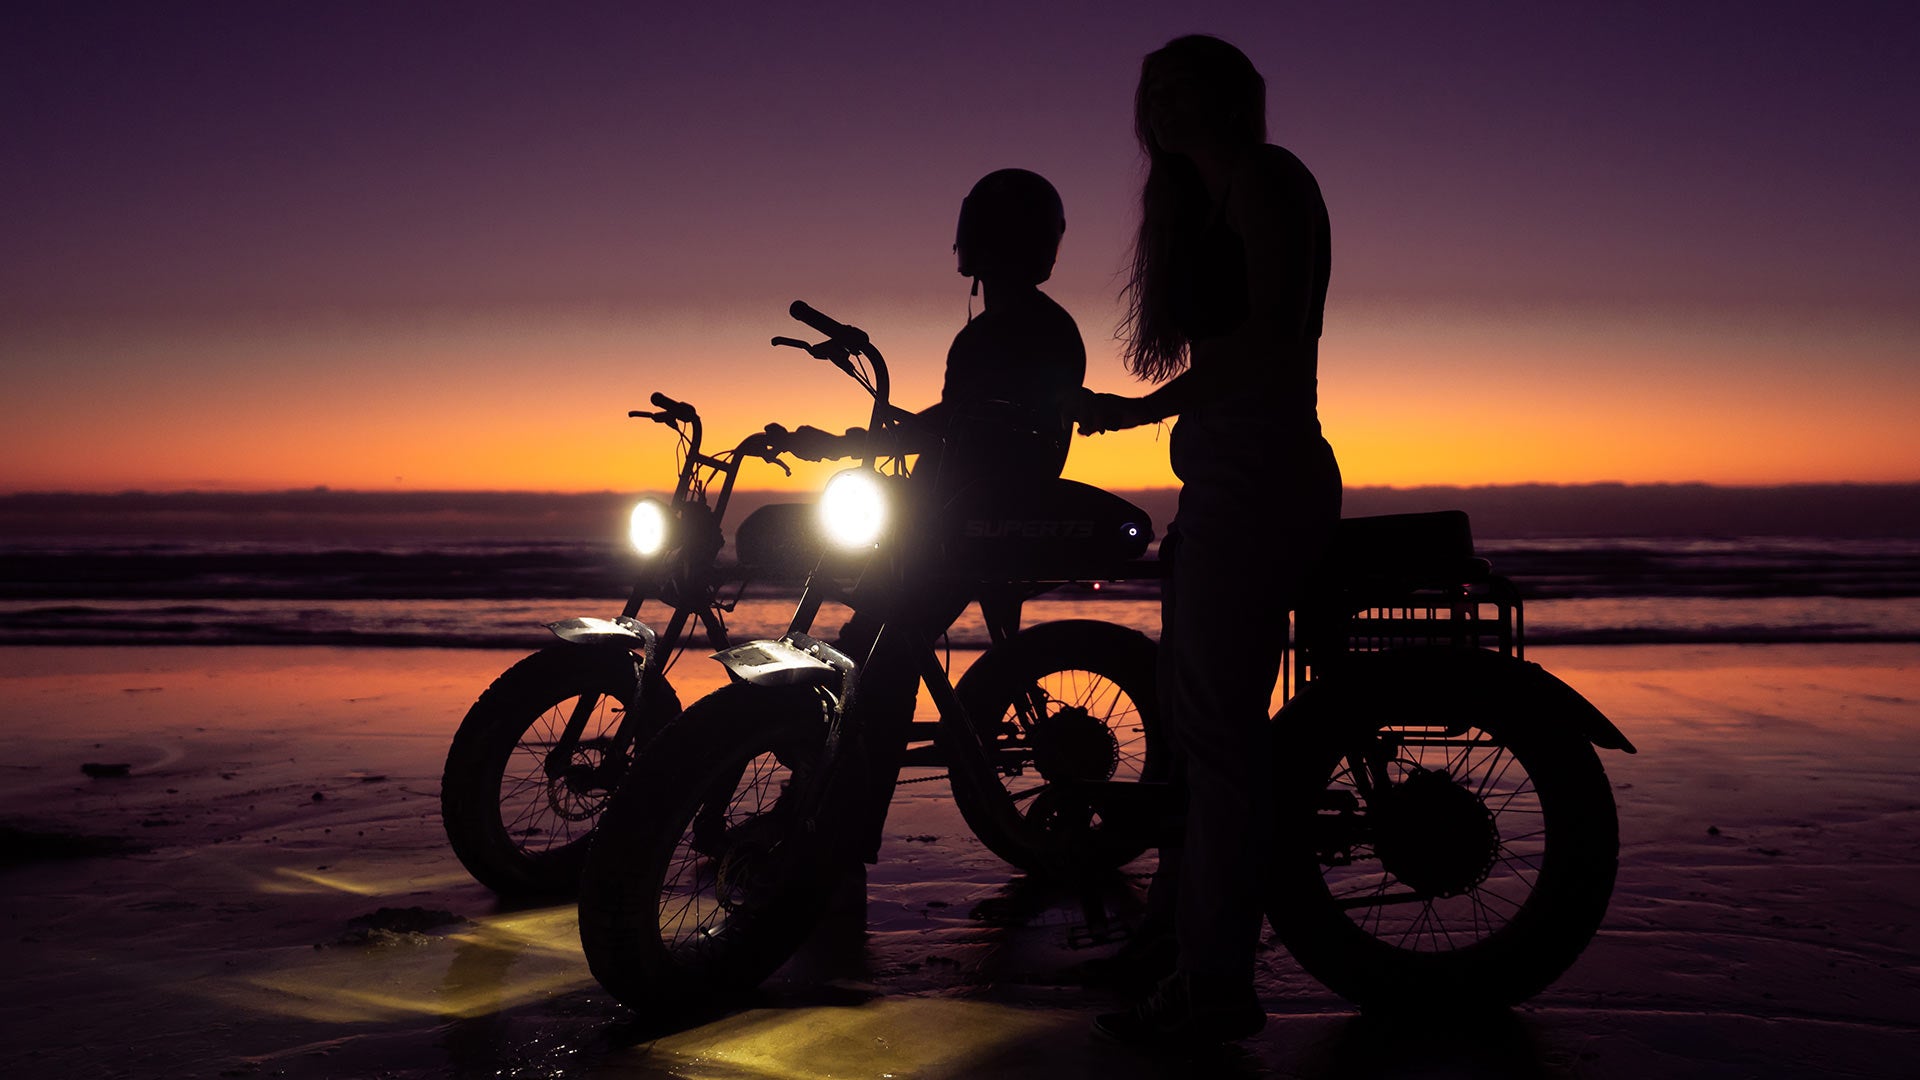 Silhouette of 2 Super73 ebikes parked at beach after sunset